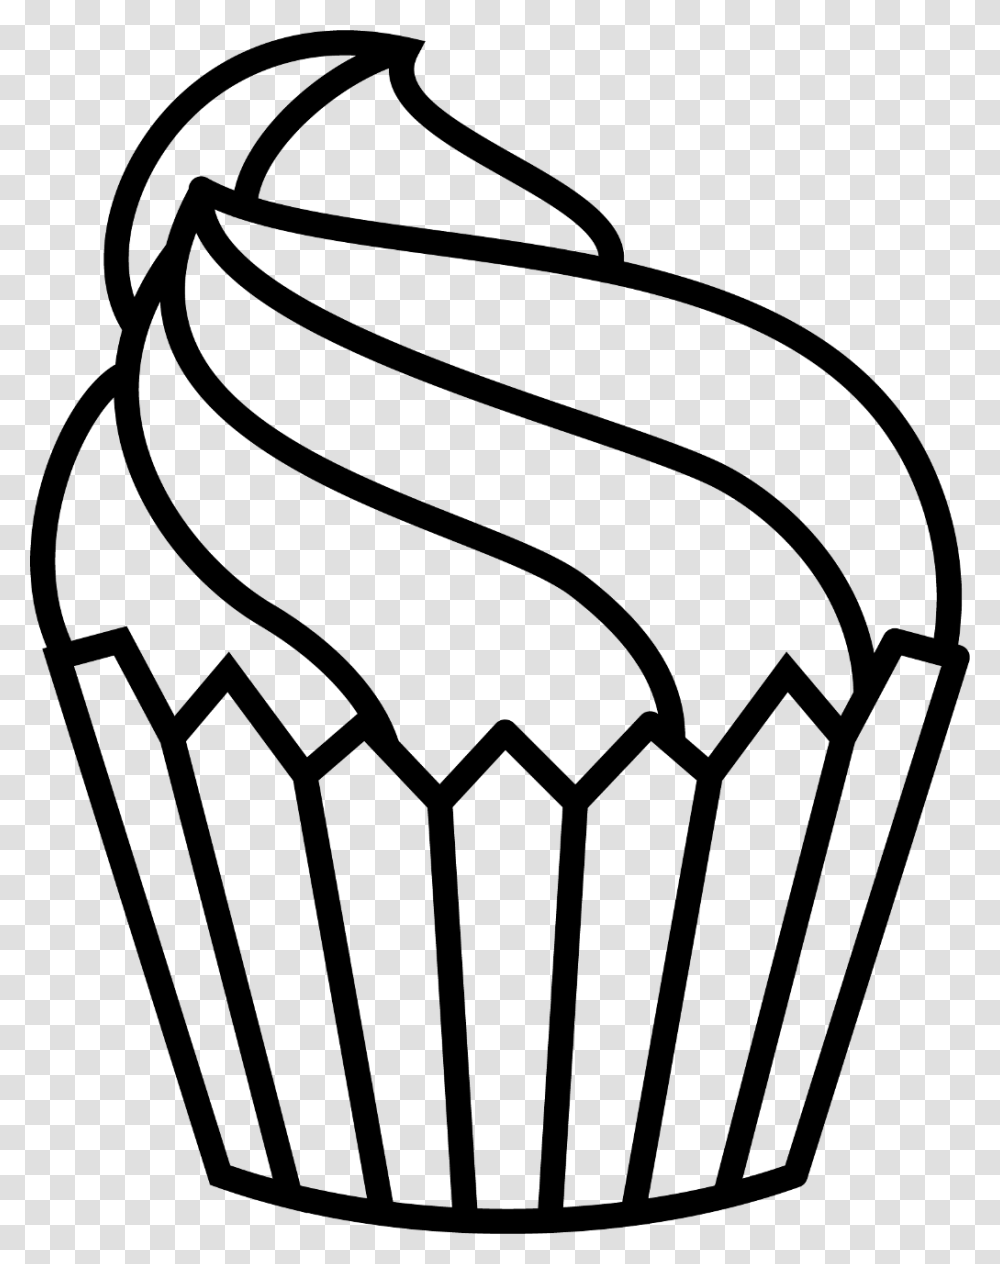 Cupcake Outline Clipart Black And White Outline Pictures Of Cartoons, Gray, World Of Warcraft Transparent Png